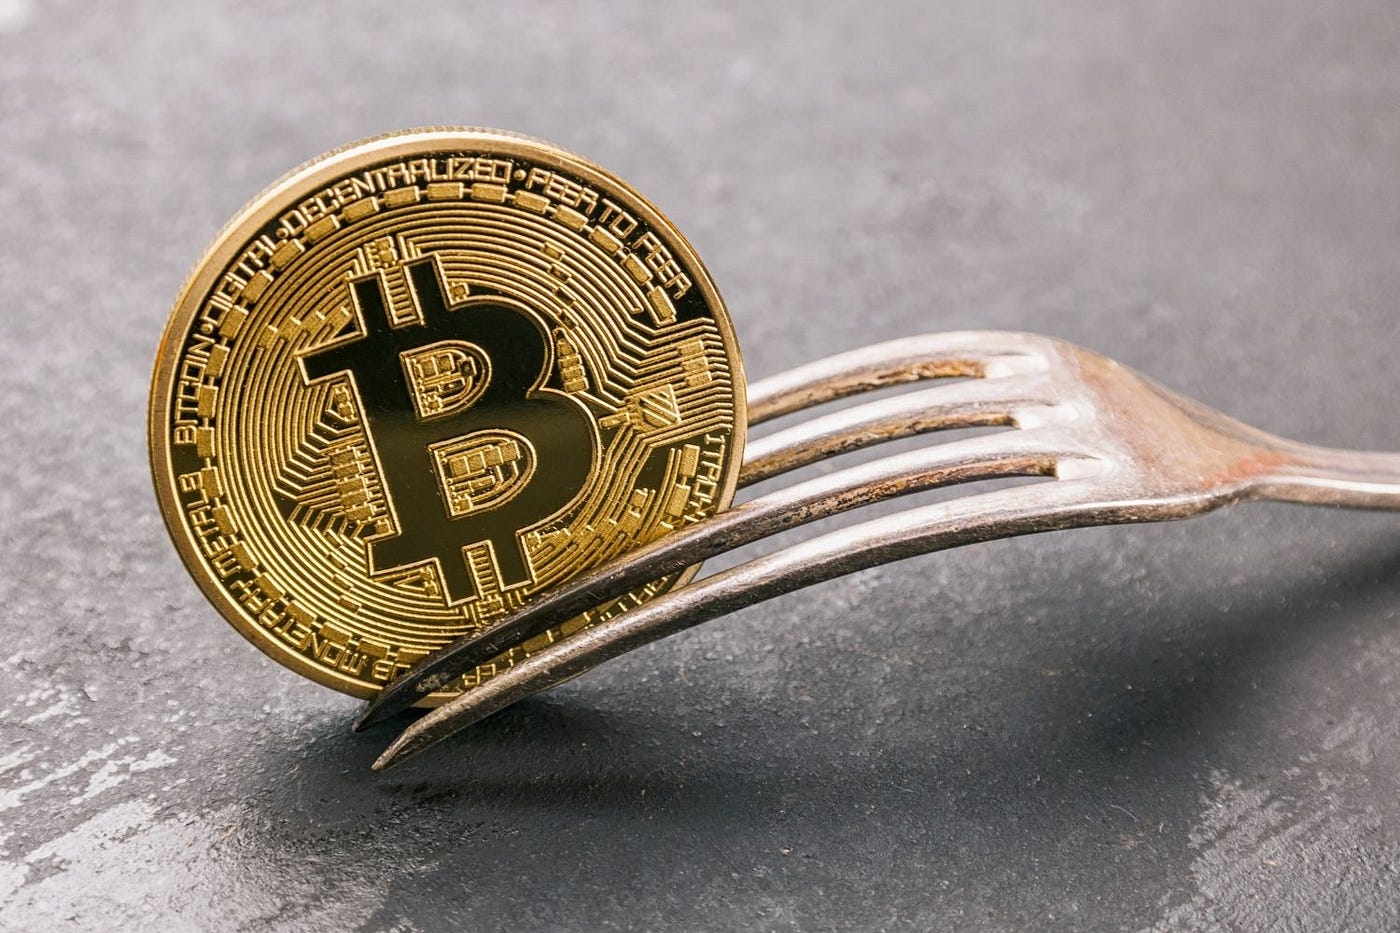 What Digital Currency Will Be Created With The Next Bitcoin Fork?